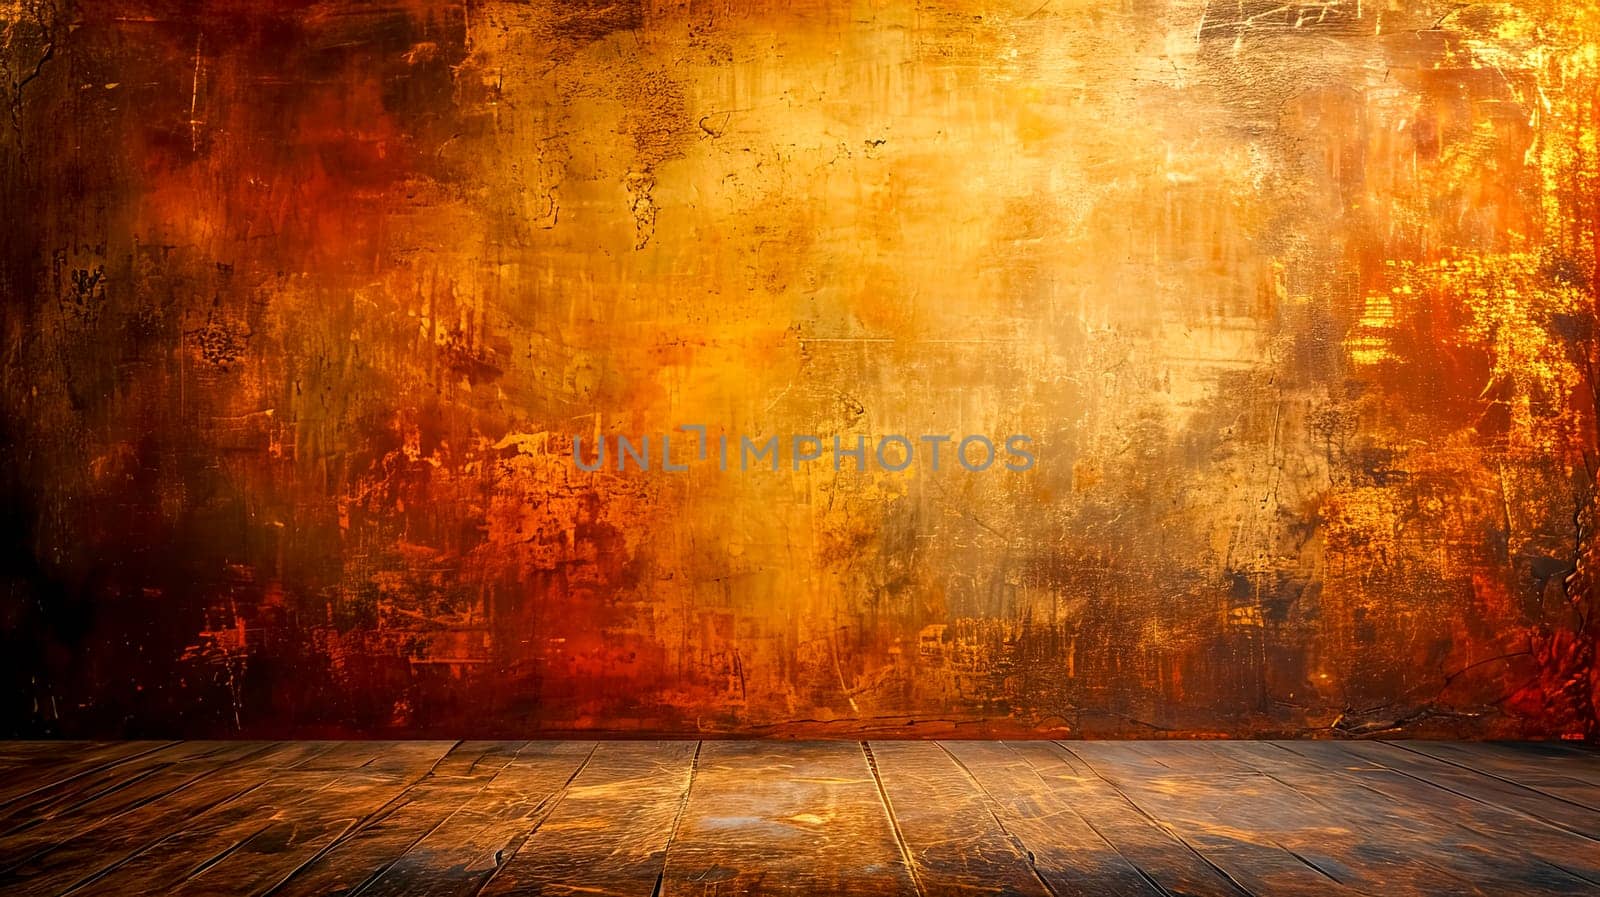 Warm golden abstract painting on dark wood floor, artistic backdrop by Edophoto